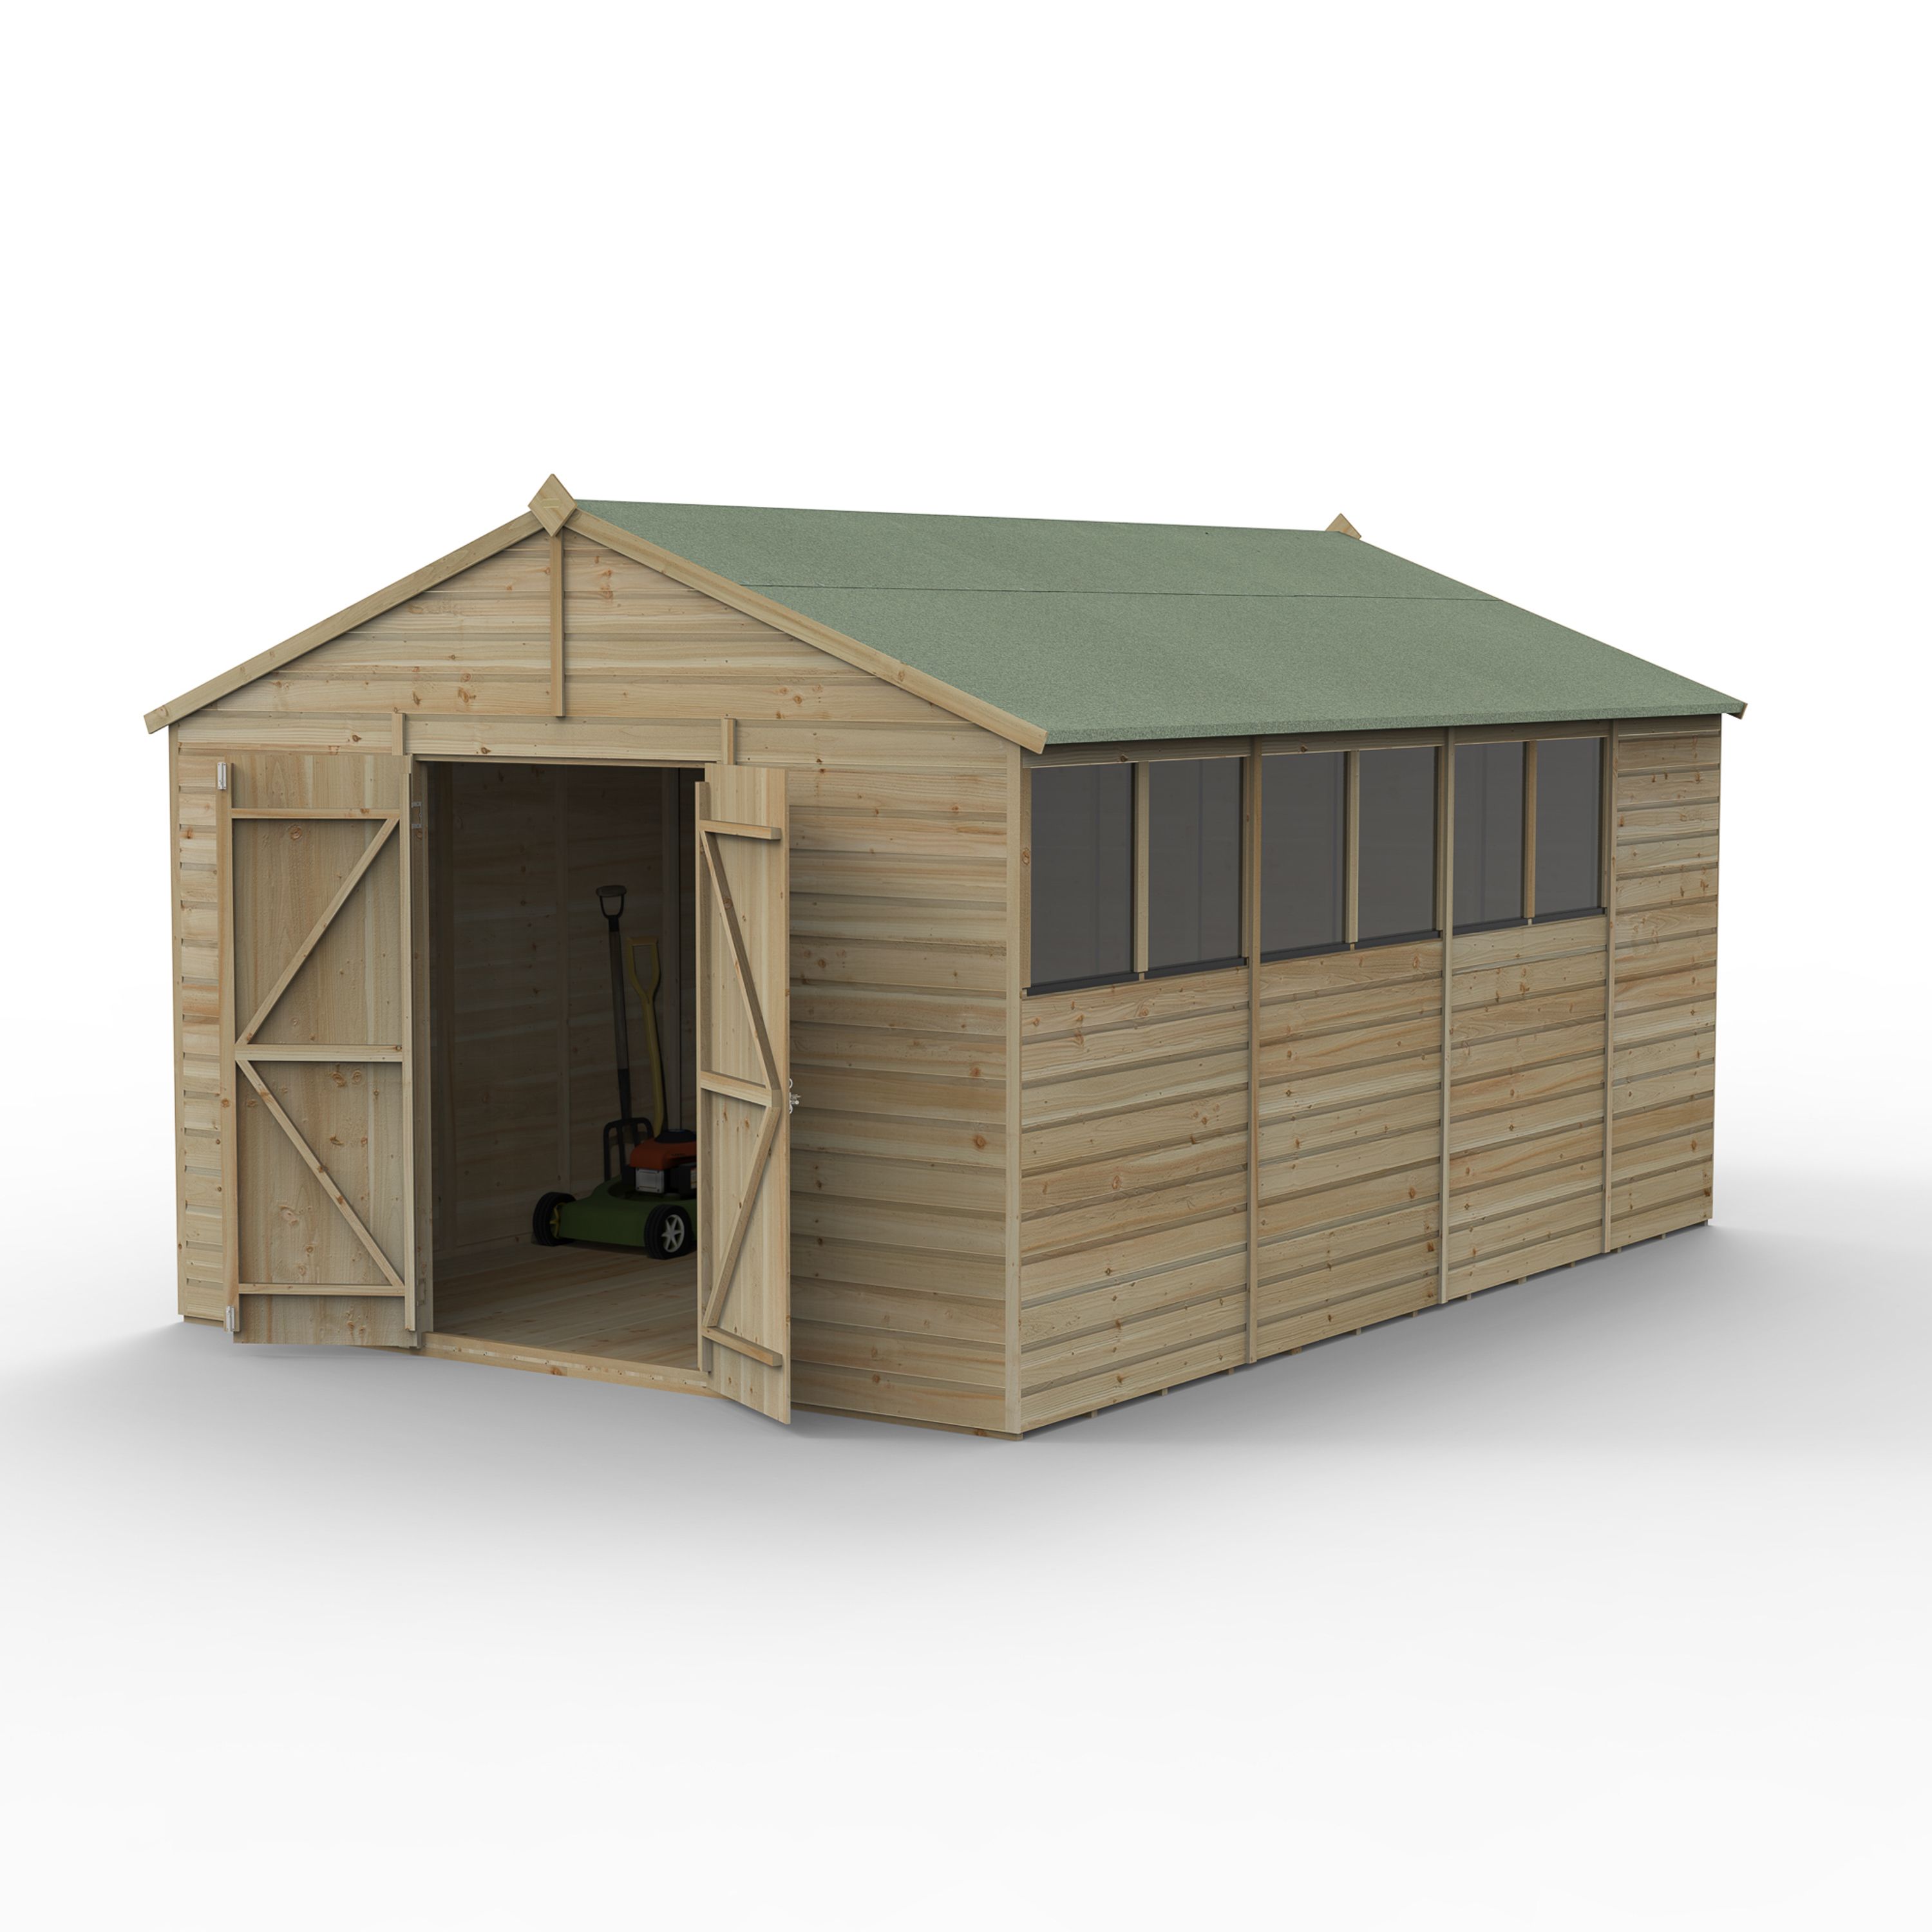 Forest Garden Beckwood 10x15 ft Apex Natural timber Wooden 2 door Shed with floor & 6 windows (Base included)